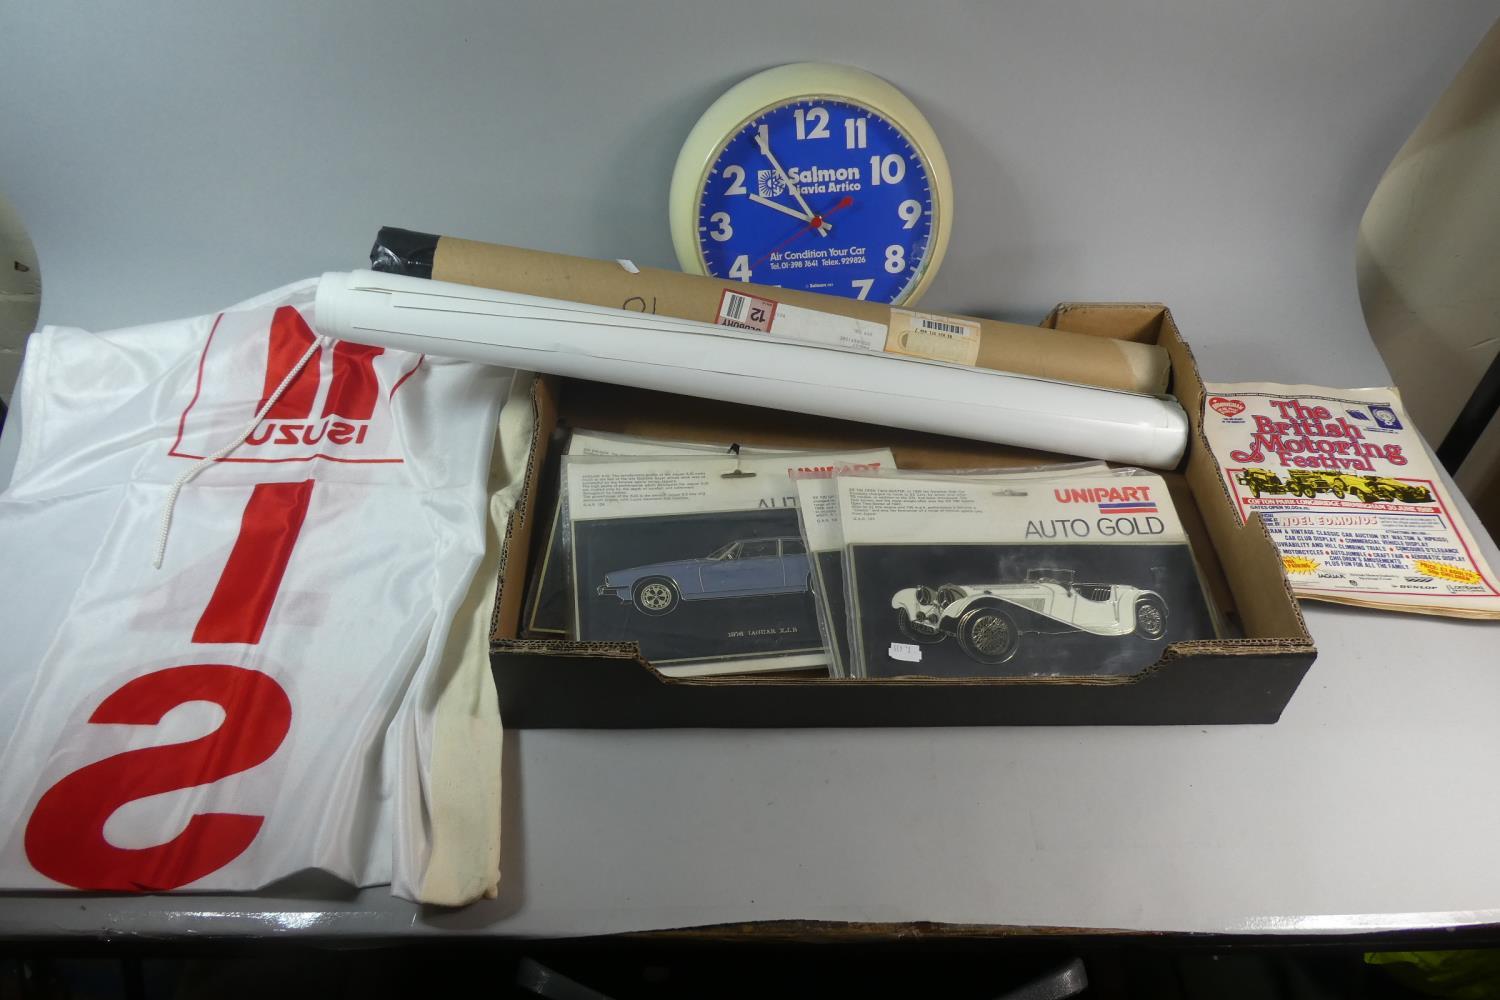 A Box Containing Isuzu Banner, Unipart Auto Gold Plaques, Vintage Wall Clock, Les Mans Posters etc